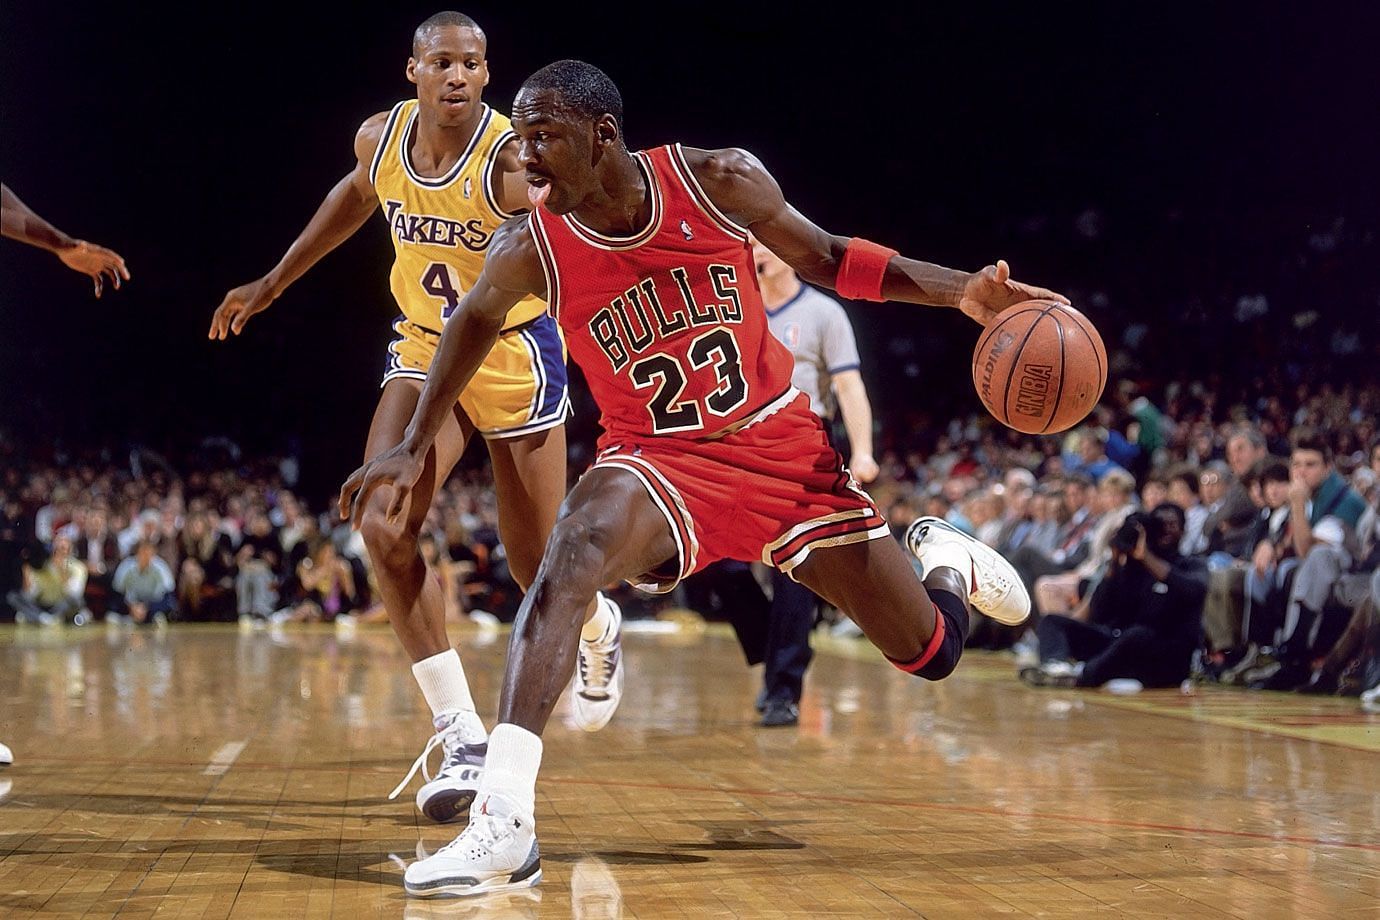 Michael Jordan recorded 10 triple-doubles in a 11-game stretch